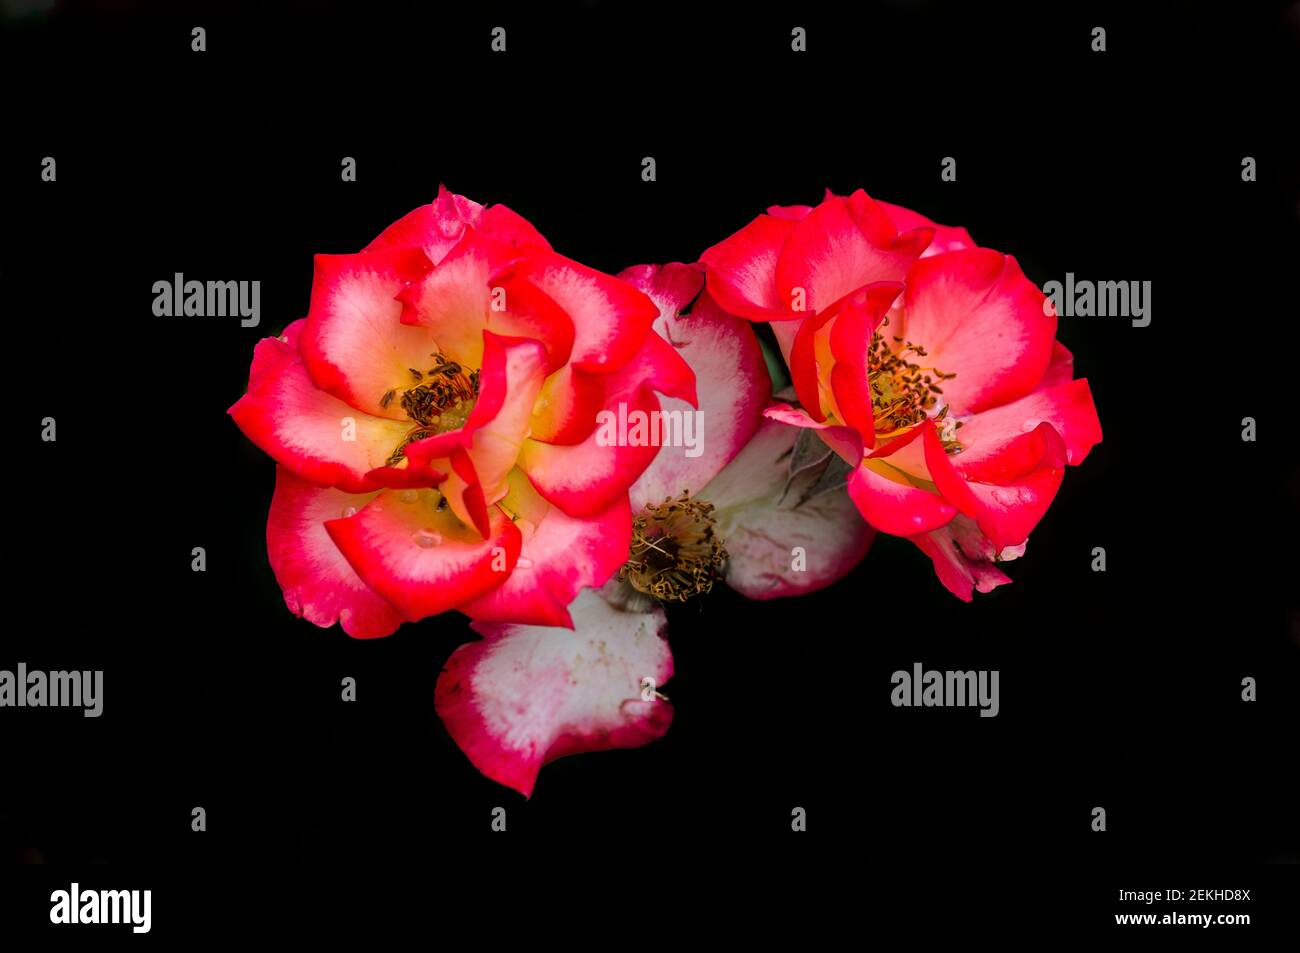 Pink rose flower heads in black background Stock Photo